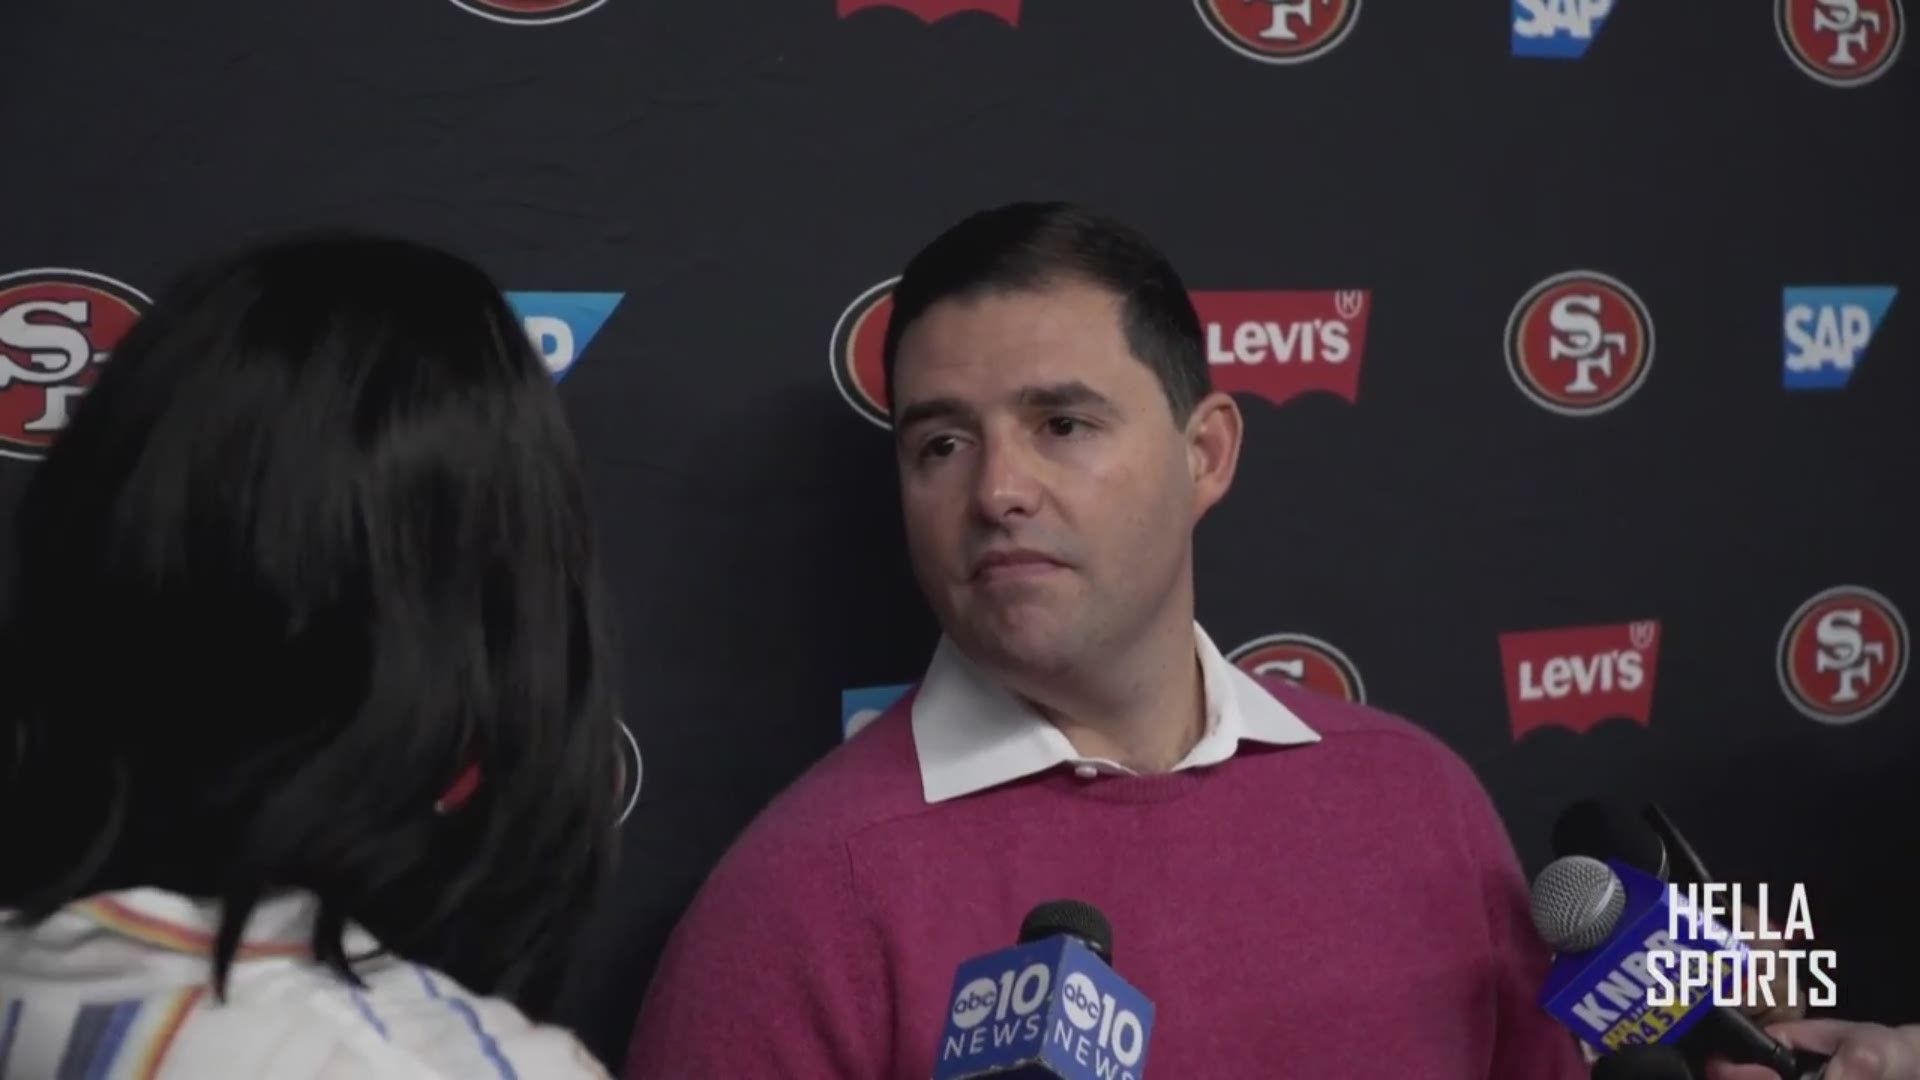 San Francisco 49ers CEO Jed York speaks with local media ahead of Super Bowl LIV